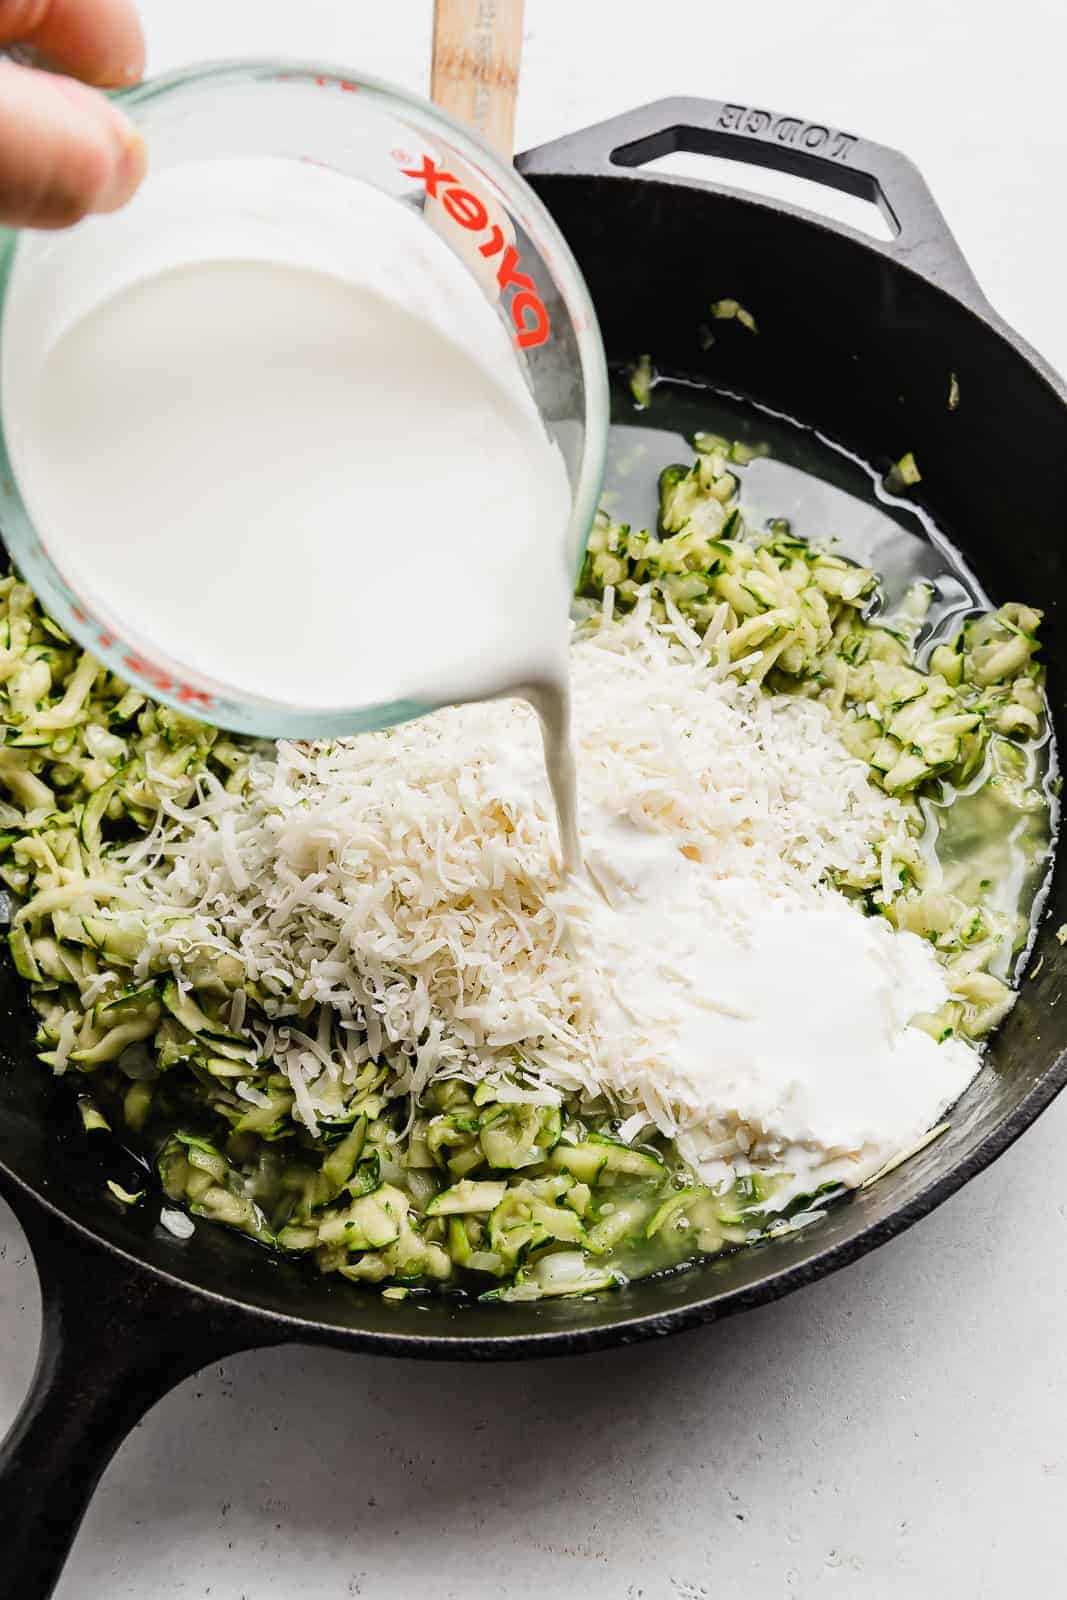 Heavy cream being poured overtop shredded zucchini that's in a black skillet.